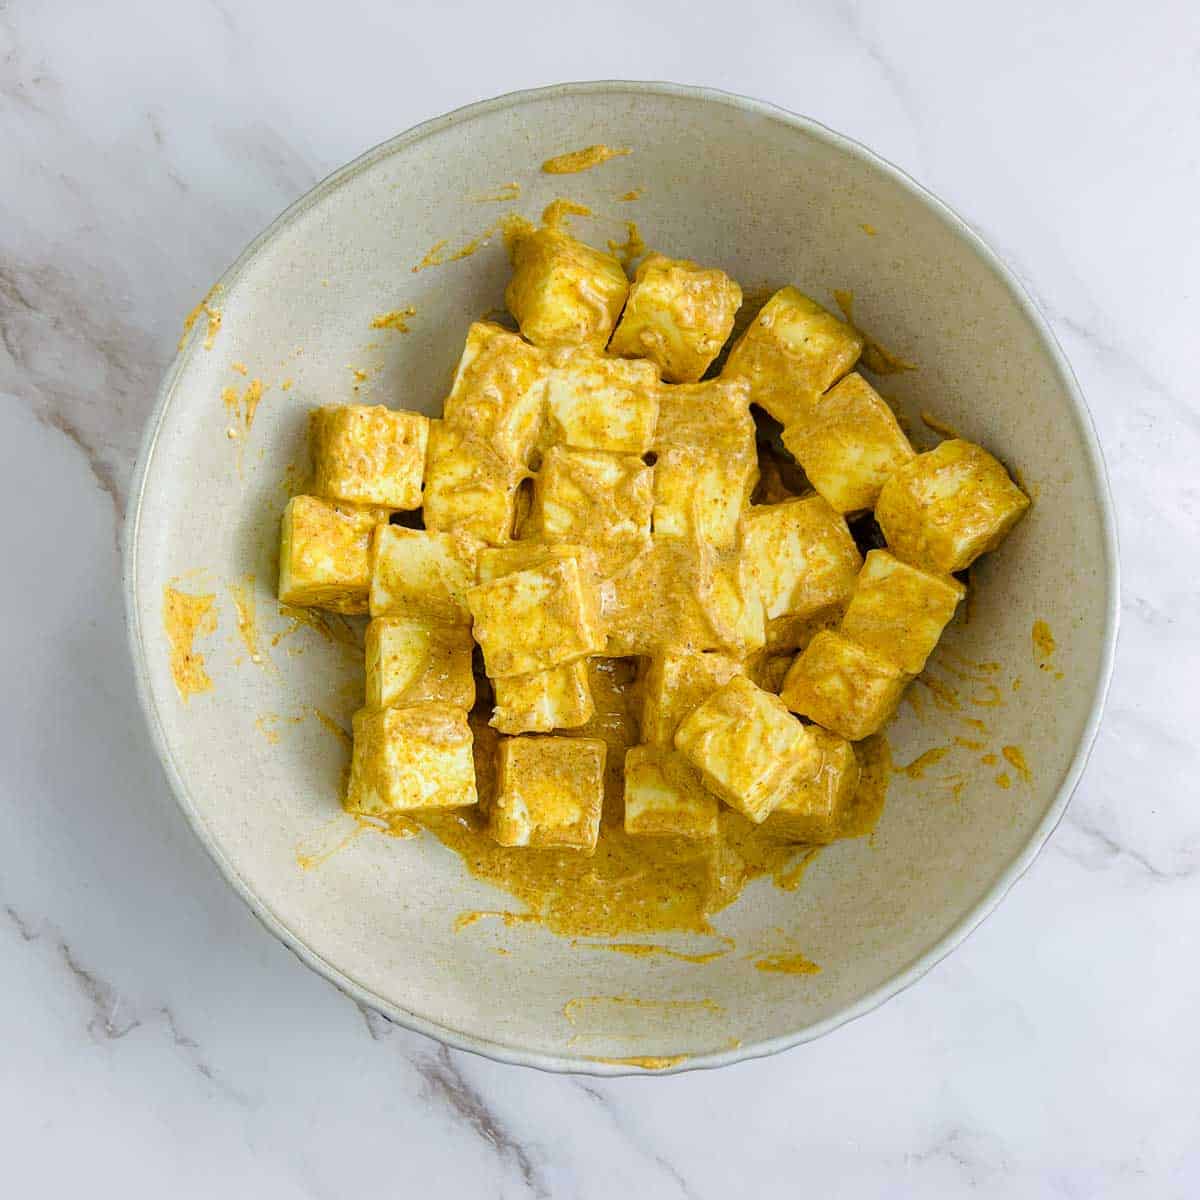 Marinated paneer in a brown bowl.